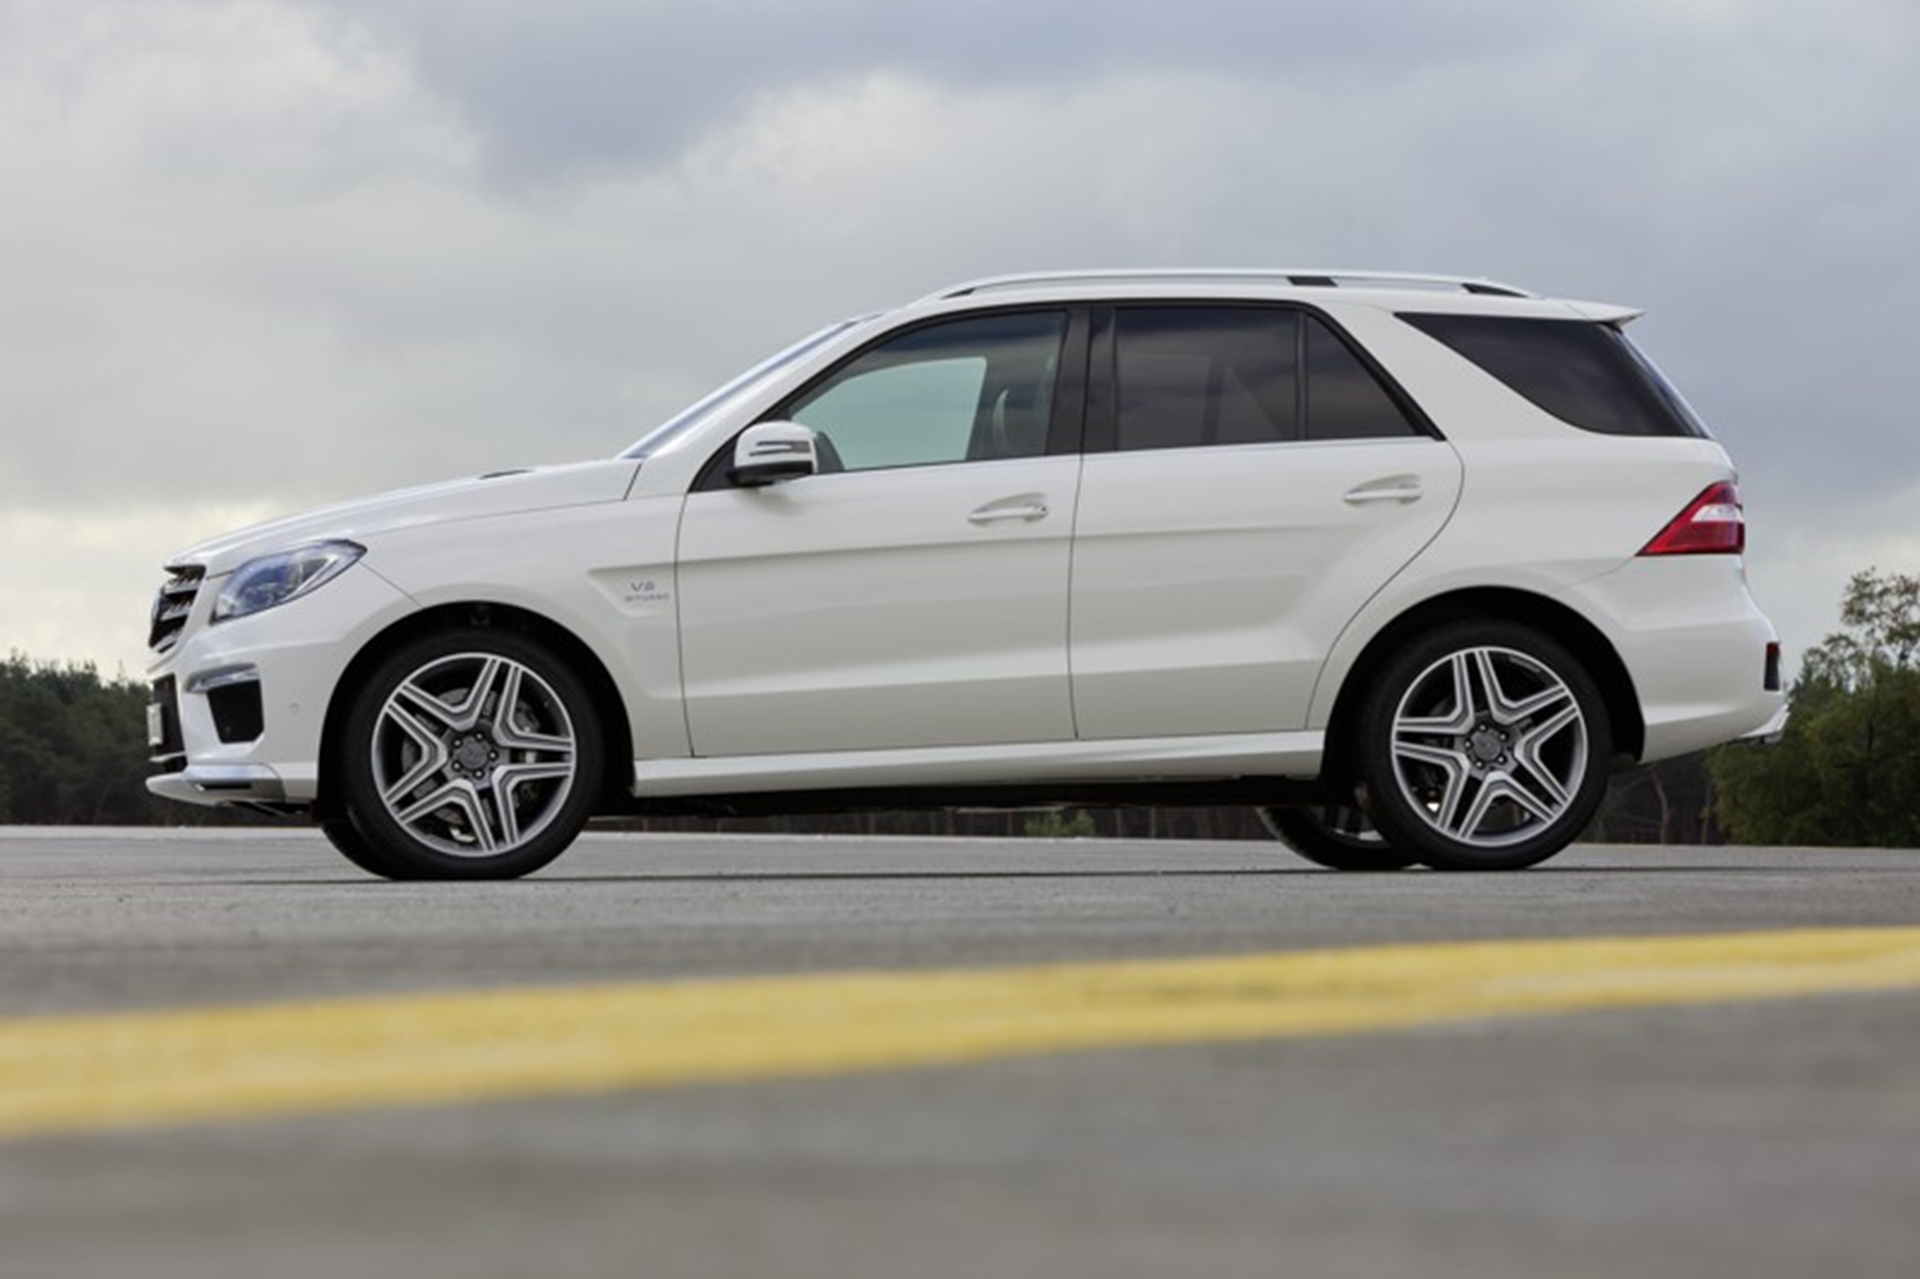 Mercedes-Benz ML 63 AMG: Efficiency and superlative performance